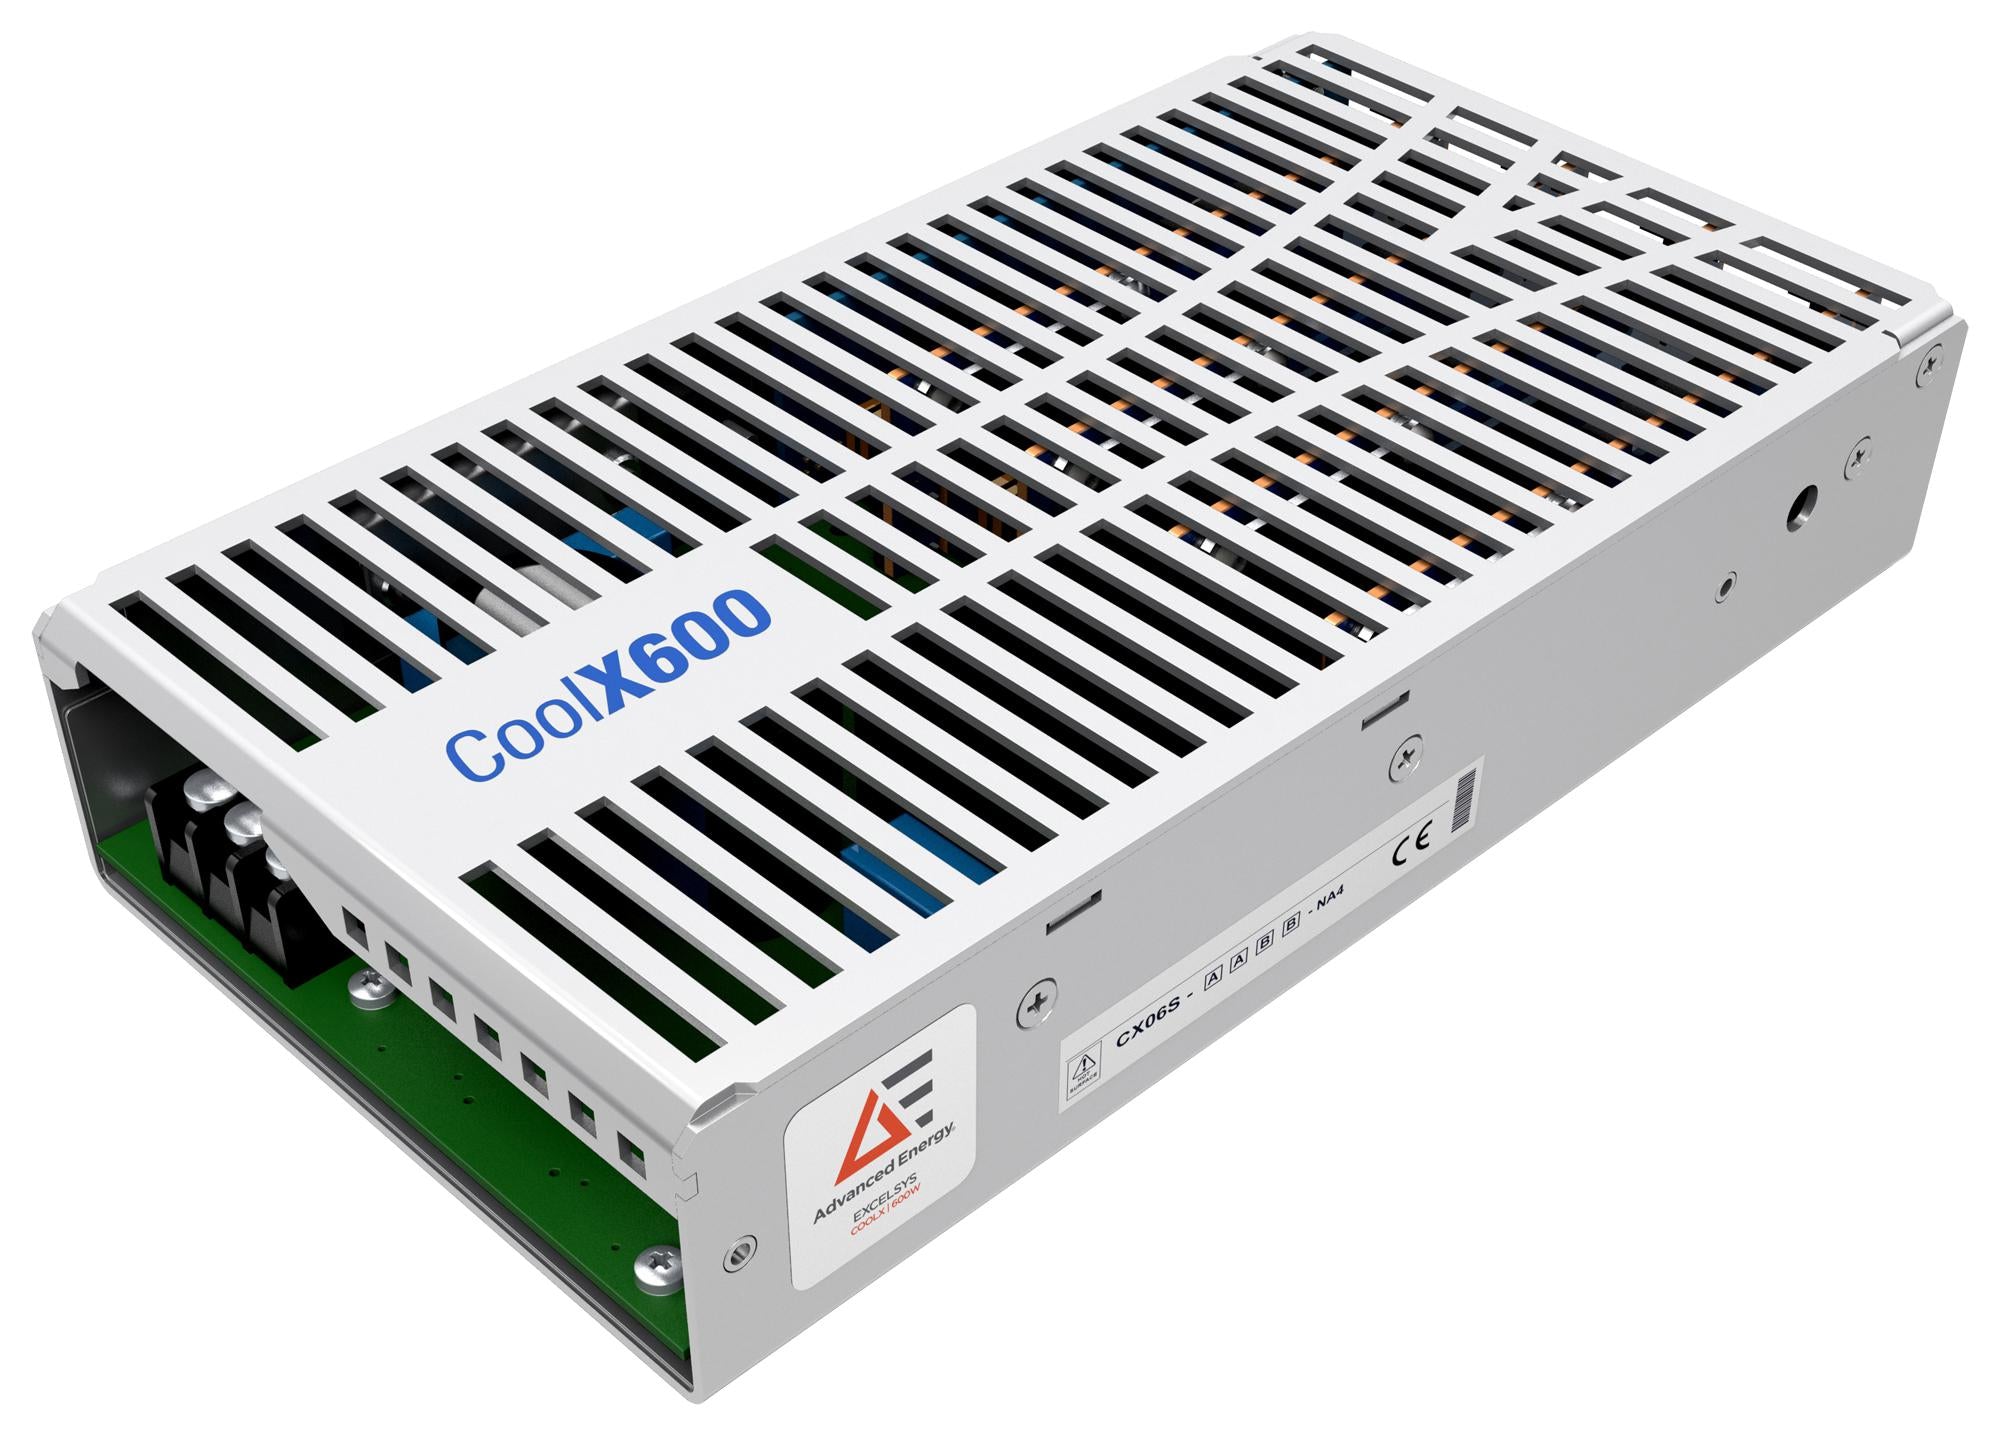 CX06S-0000-N-B CONFIGURABLE POWER COOLPAC 4SLOT CHASSIS ADVANCED ENERGY